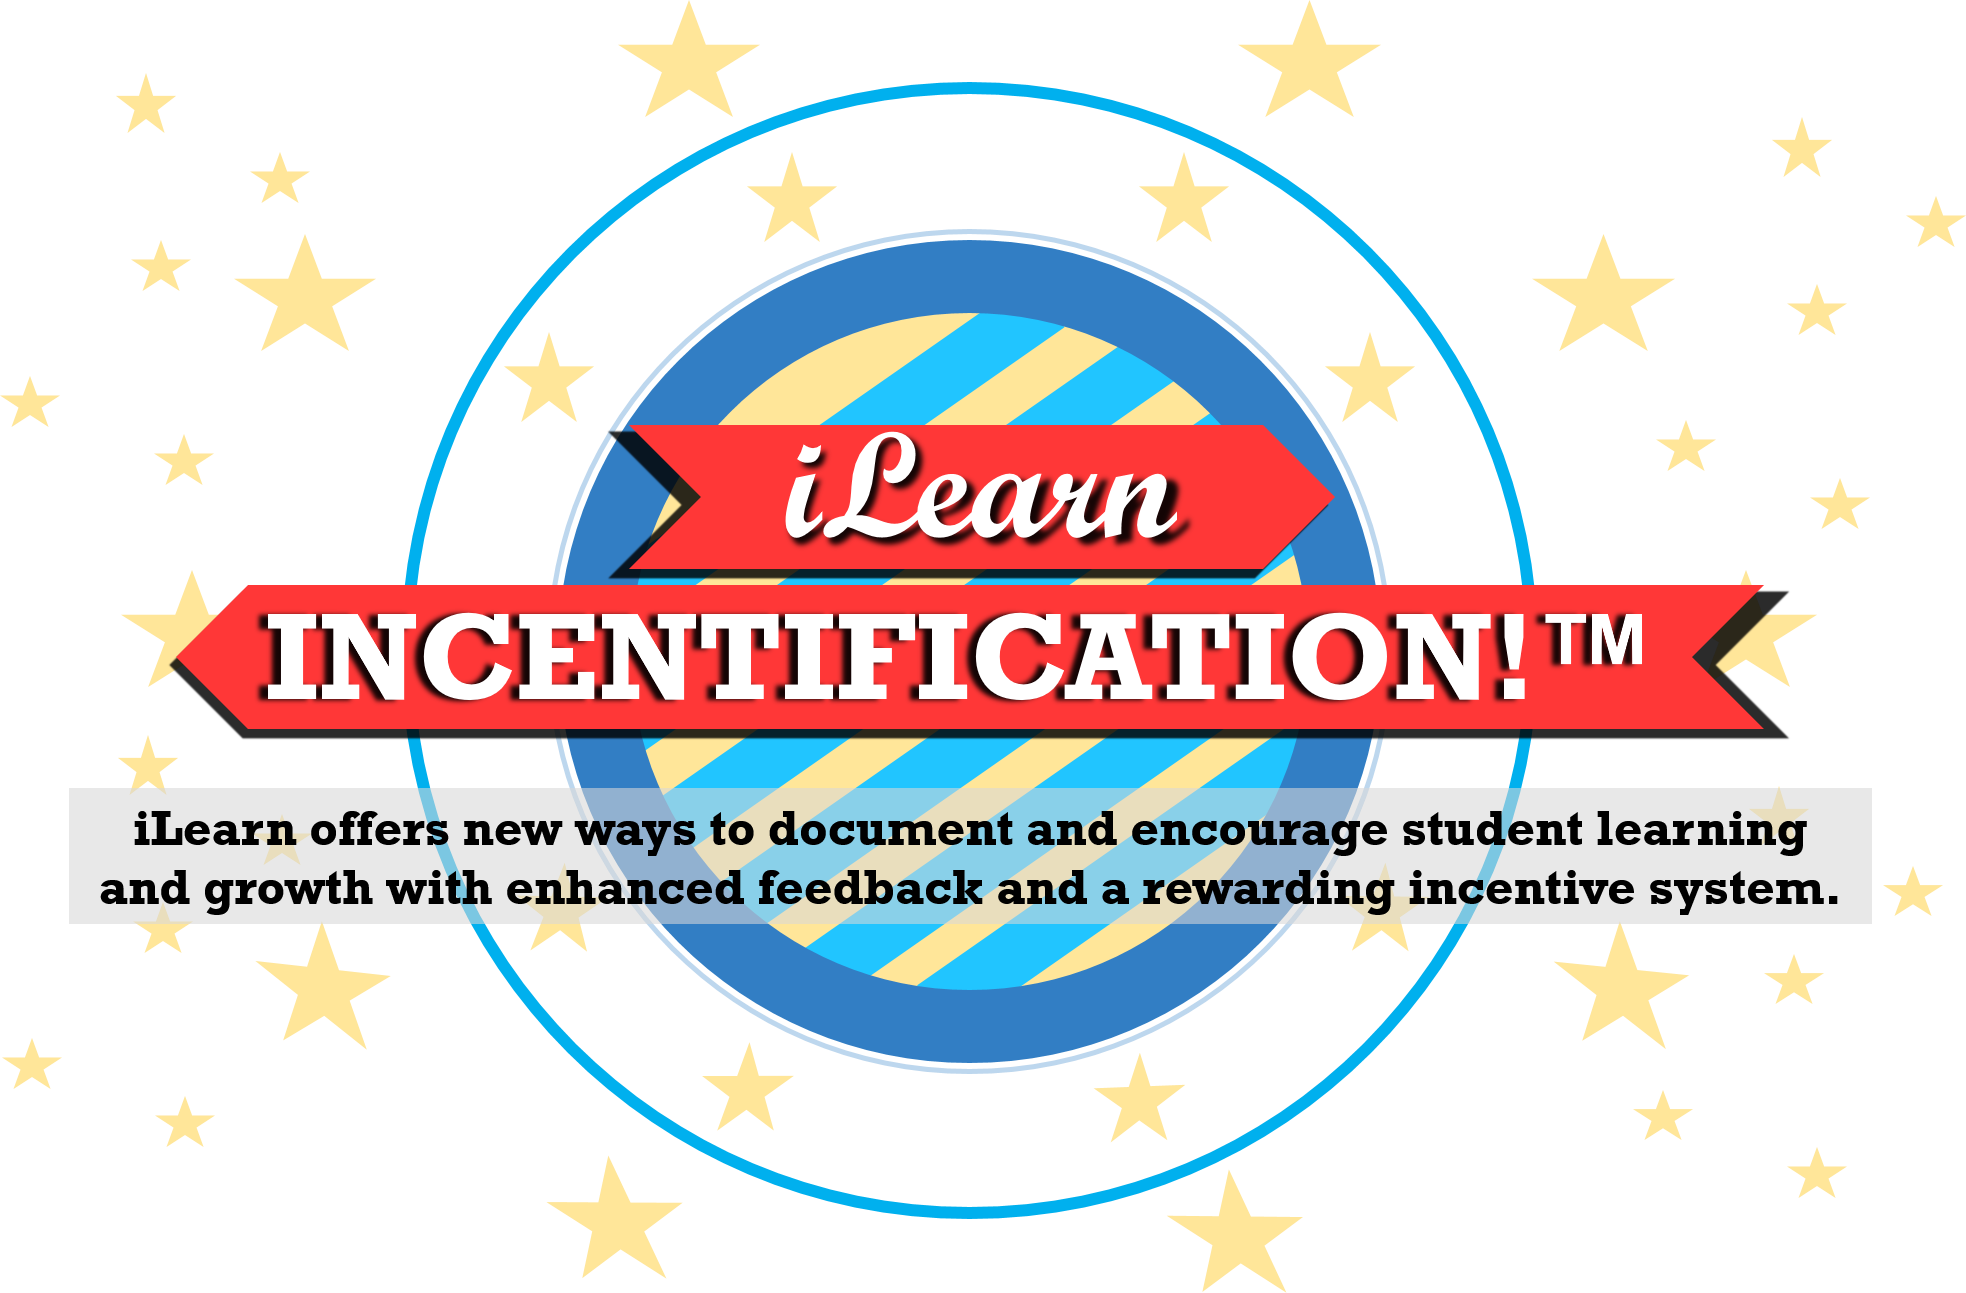 iLearn Incentification™ - iLearn offers new ways to document and encourage student learning and growth with enhanced feedback and a rewarding incentive system.